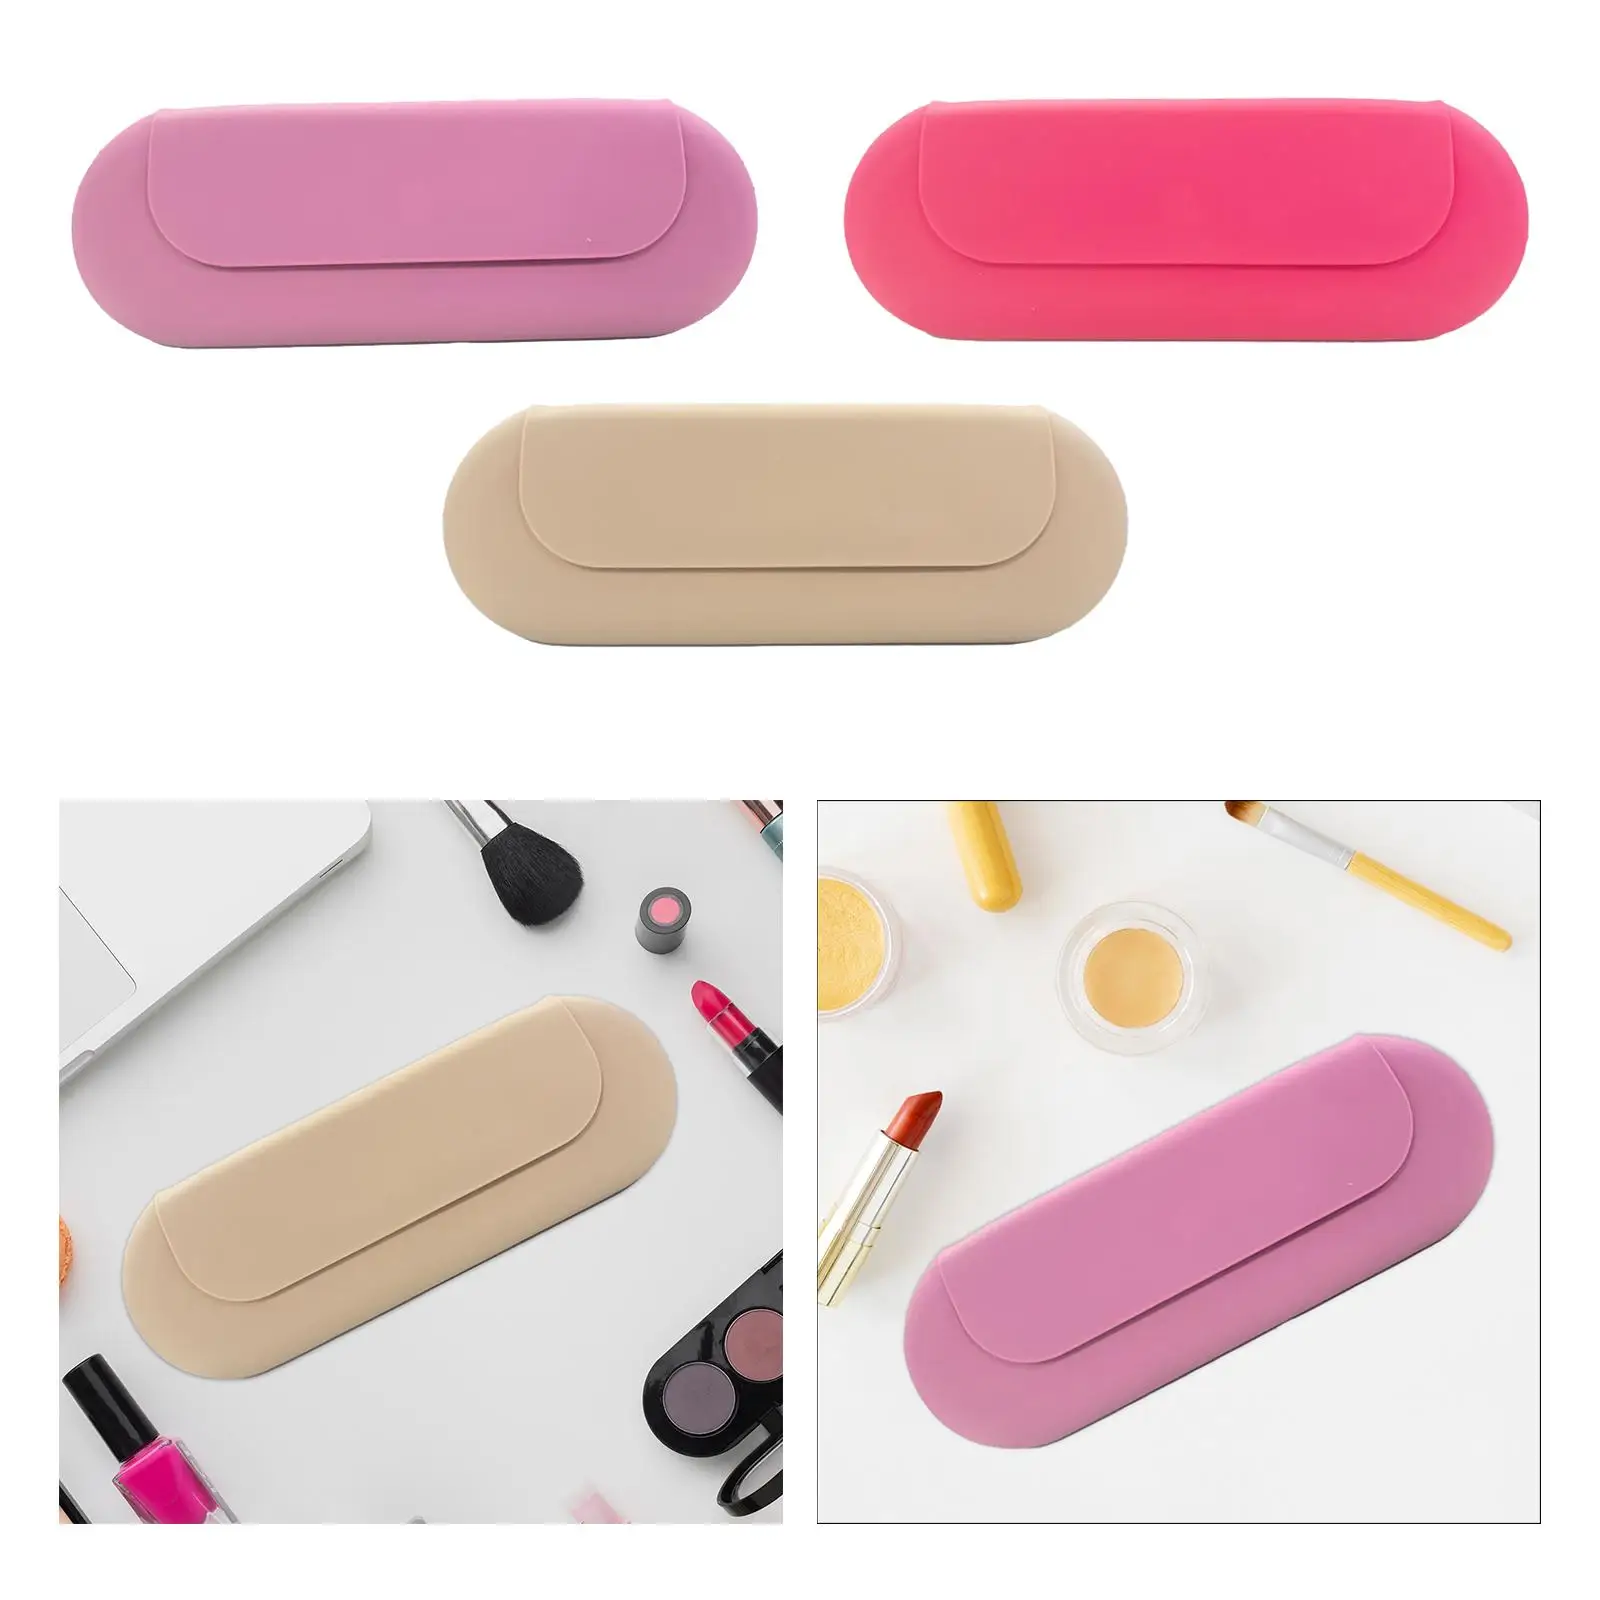 Silicone Makeup Brush Holder Easy to Clean Stylish Waterproof Cosmetic Face Brushes Holder for Girl Lady Women Birthday Gifts